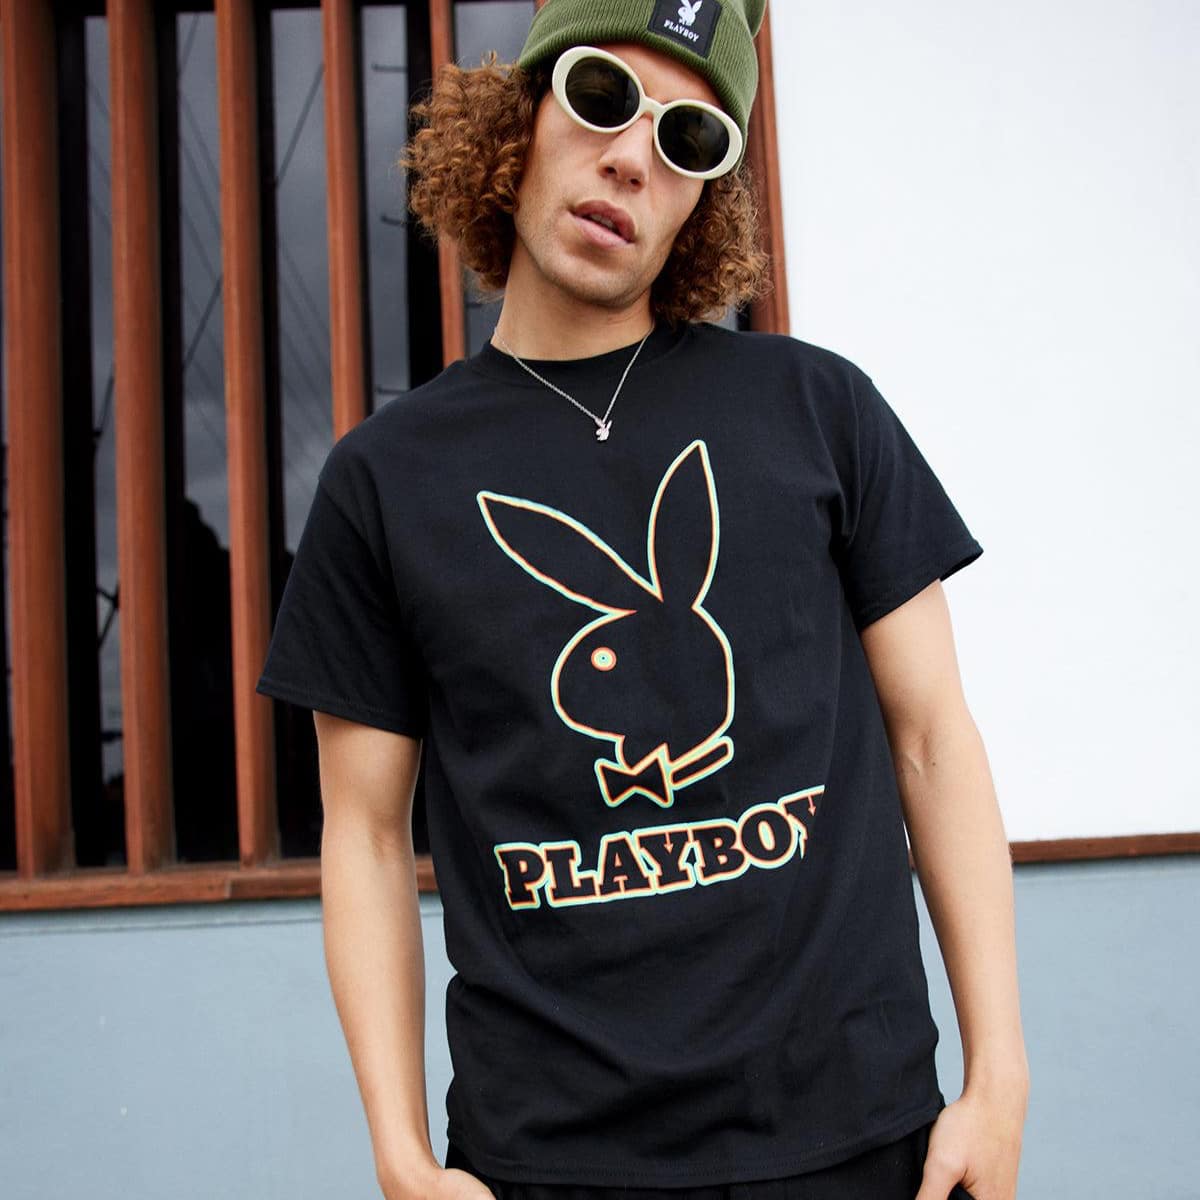 PRE LOVED - SUPREME PLAYBOY BLACK BUTTON UP SHIRT - Pleasures Core  embroidered-logo longsleeved T-shirt